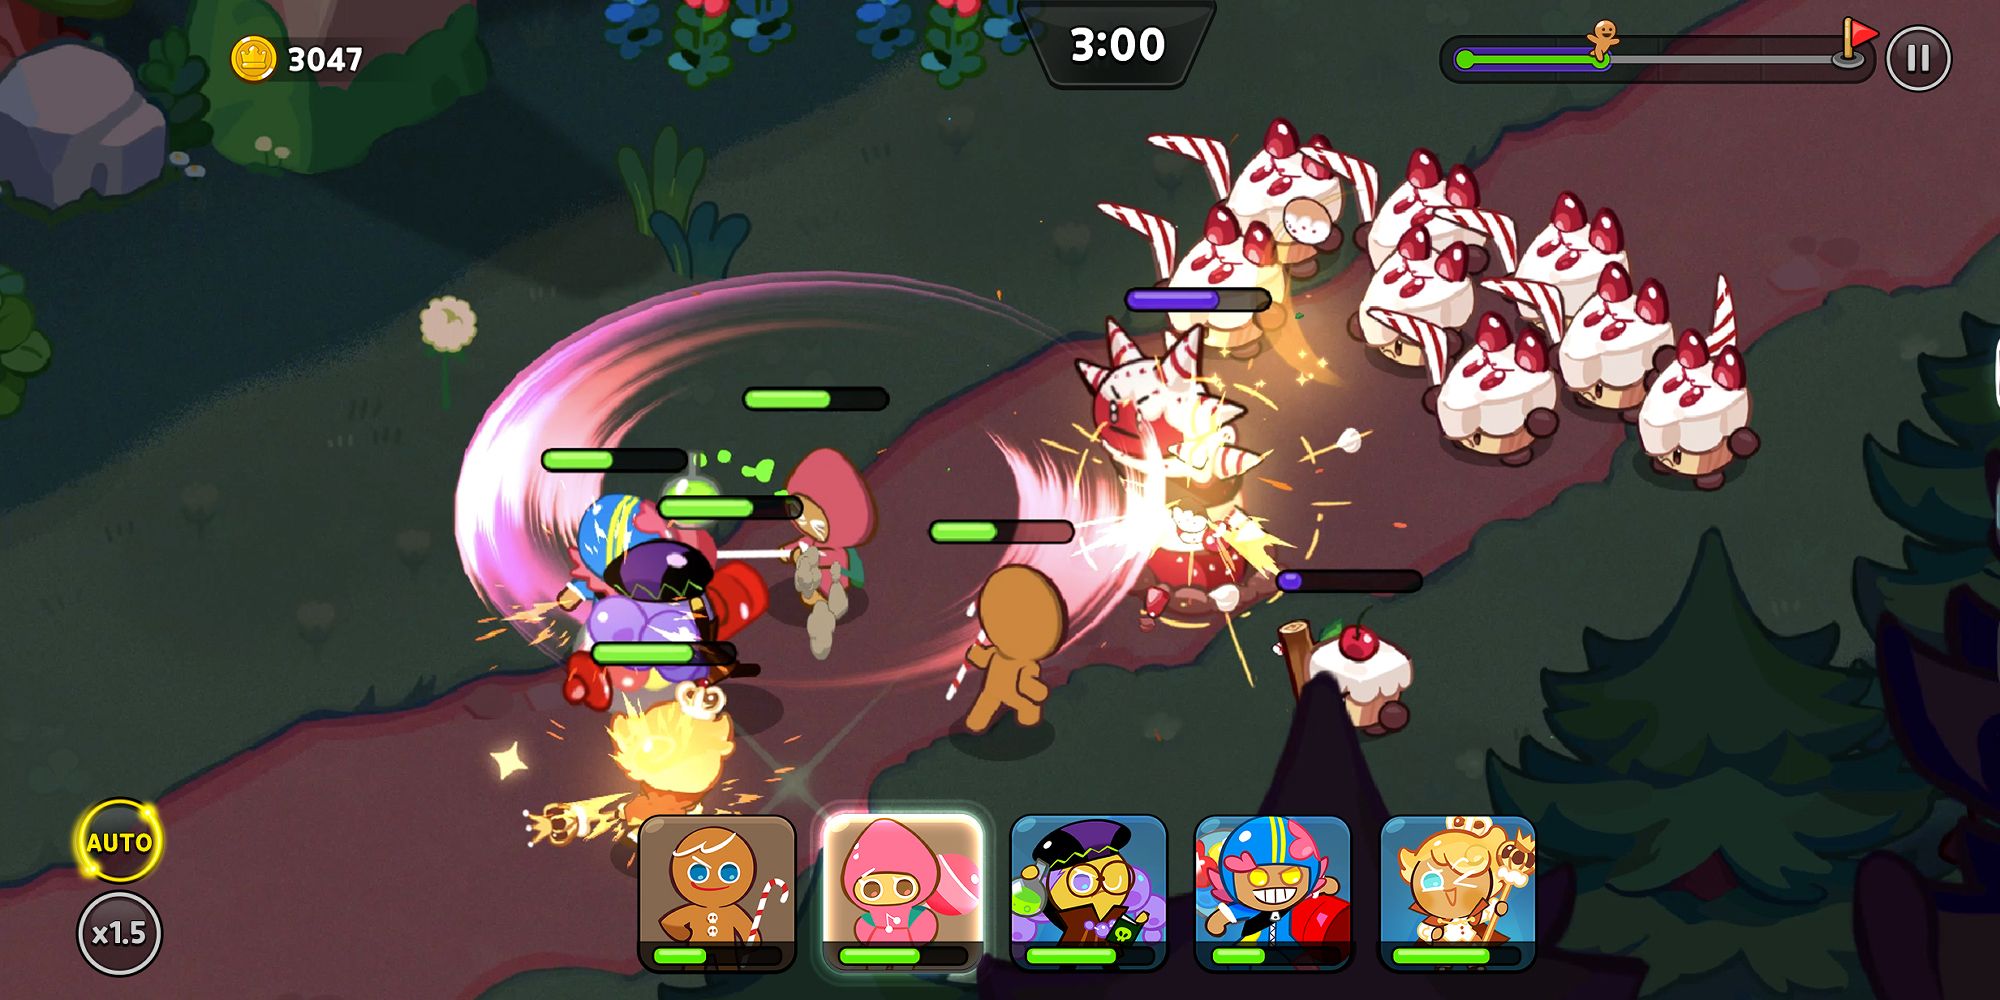 Cookie team fights through levels.